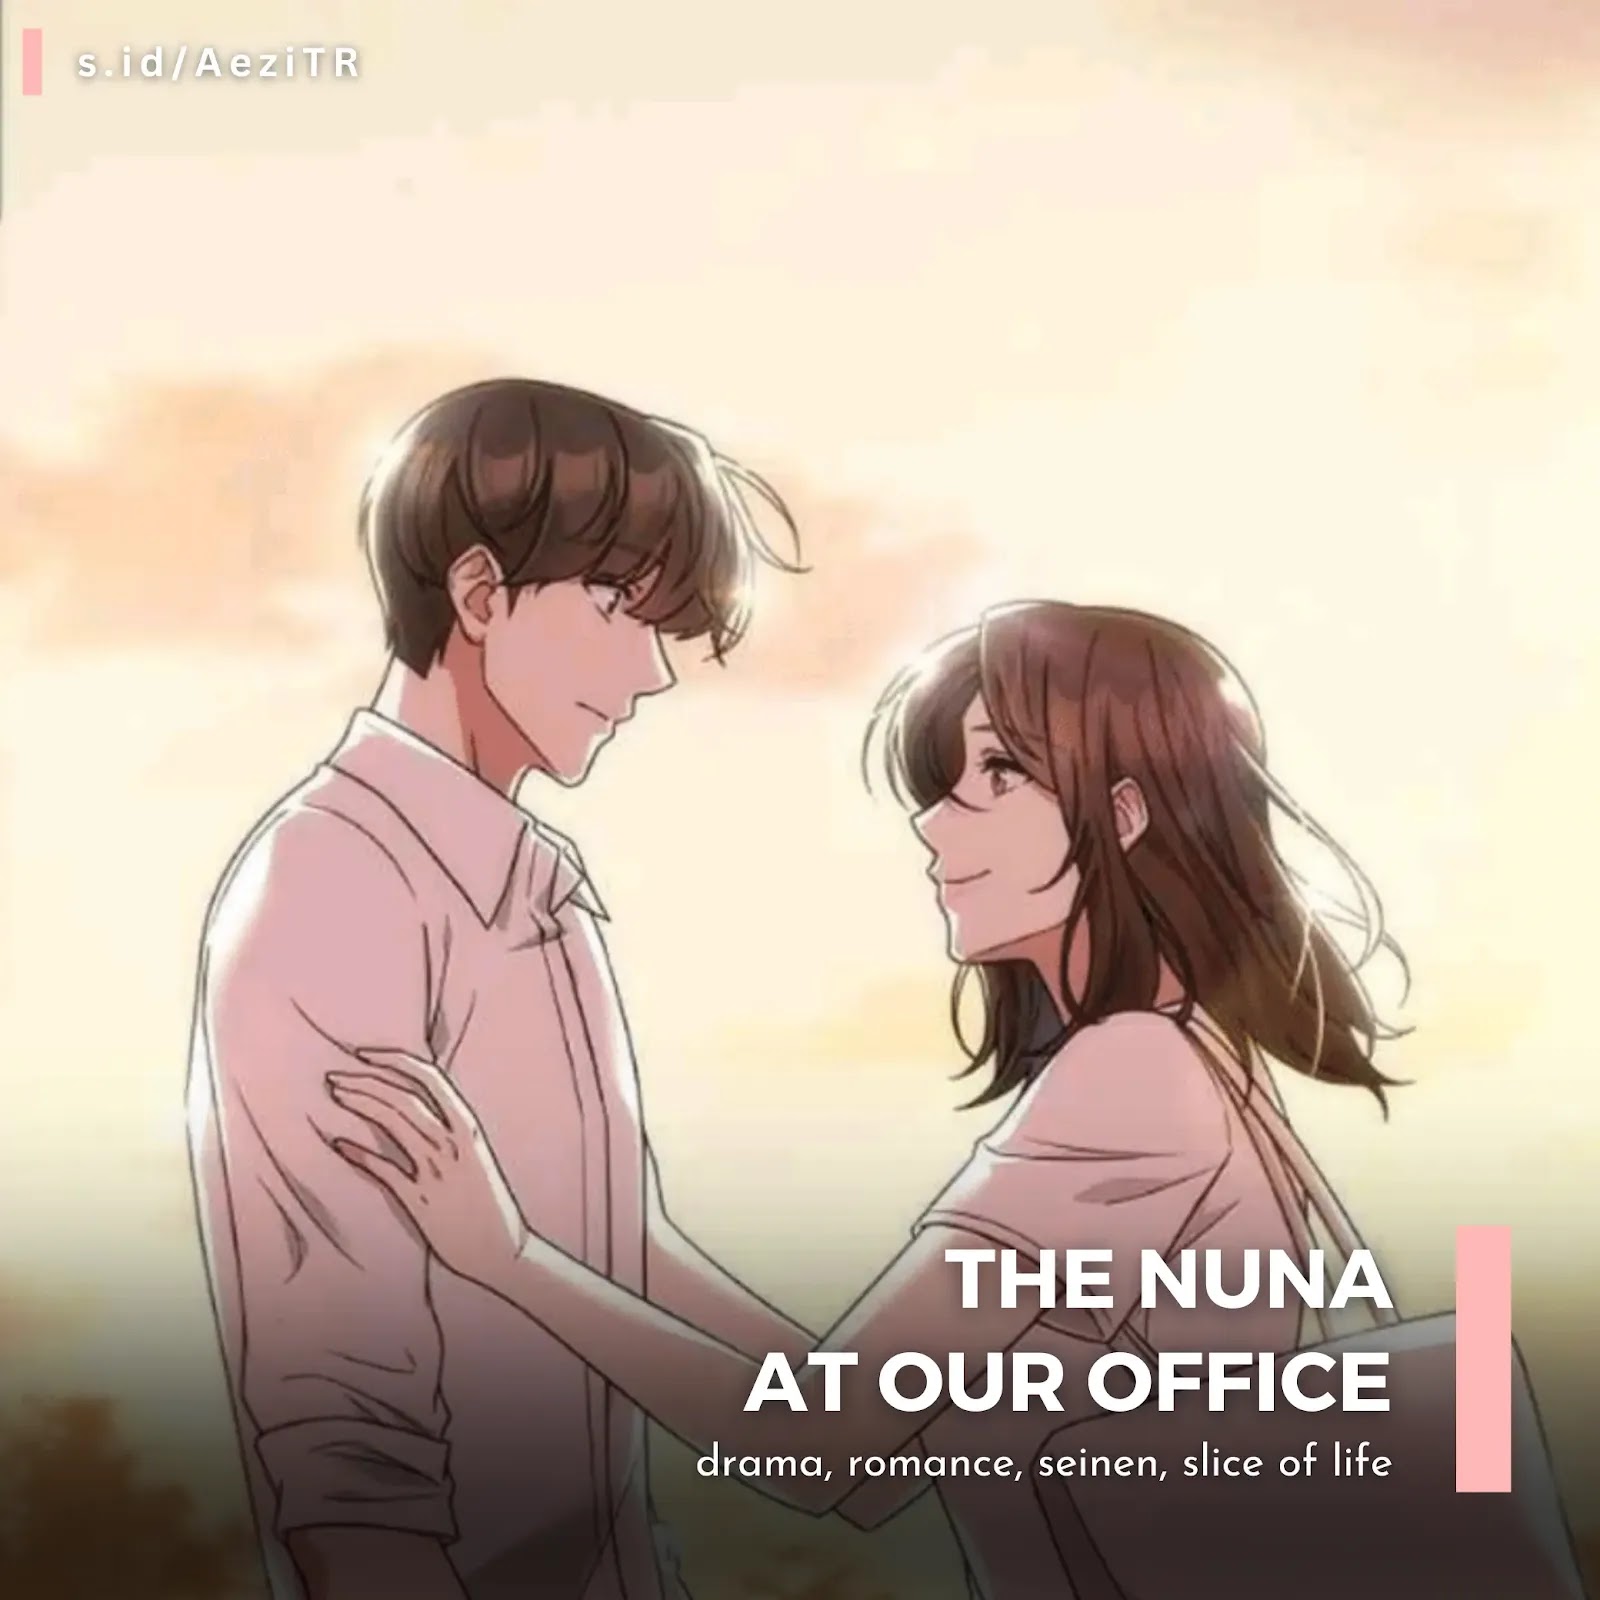 Review The Nuna at Our Office; My Office Noona Story; Office Noona; Our Office Story; The Story About My Office Noona; My Senior at the Office - Rekomendasi Manhwa Terbaik Tahun 2020 -@idyourzee